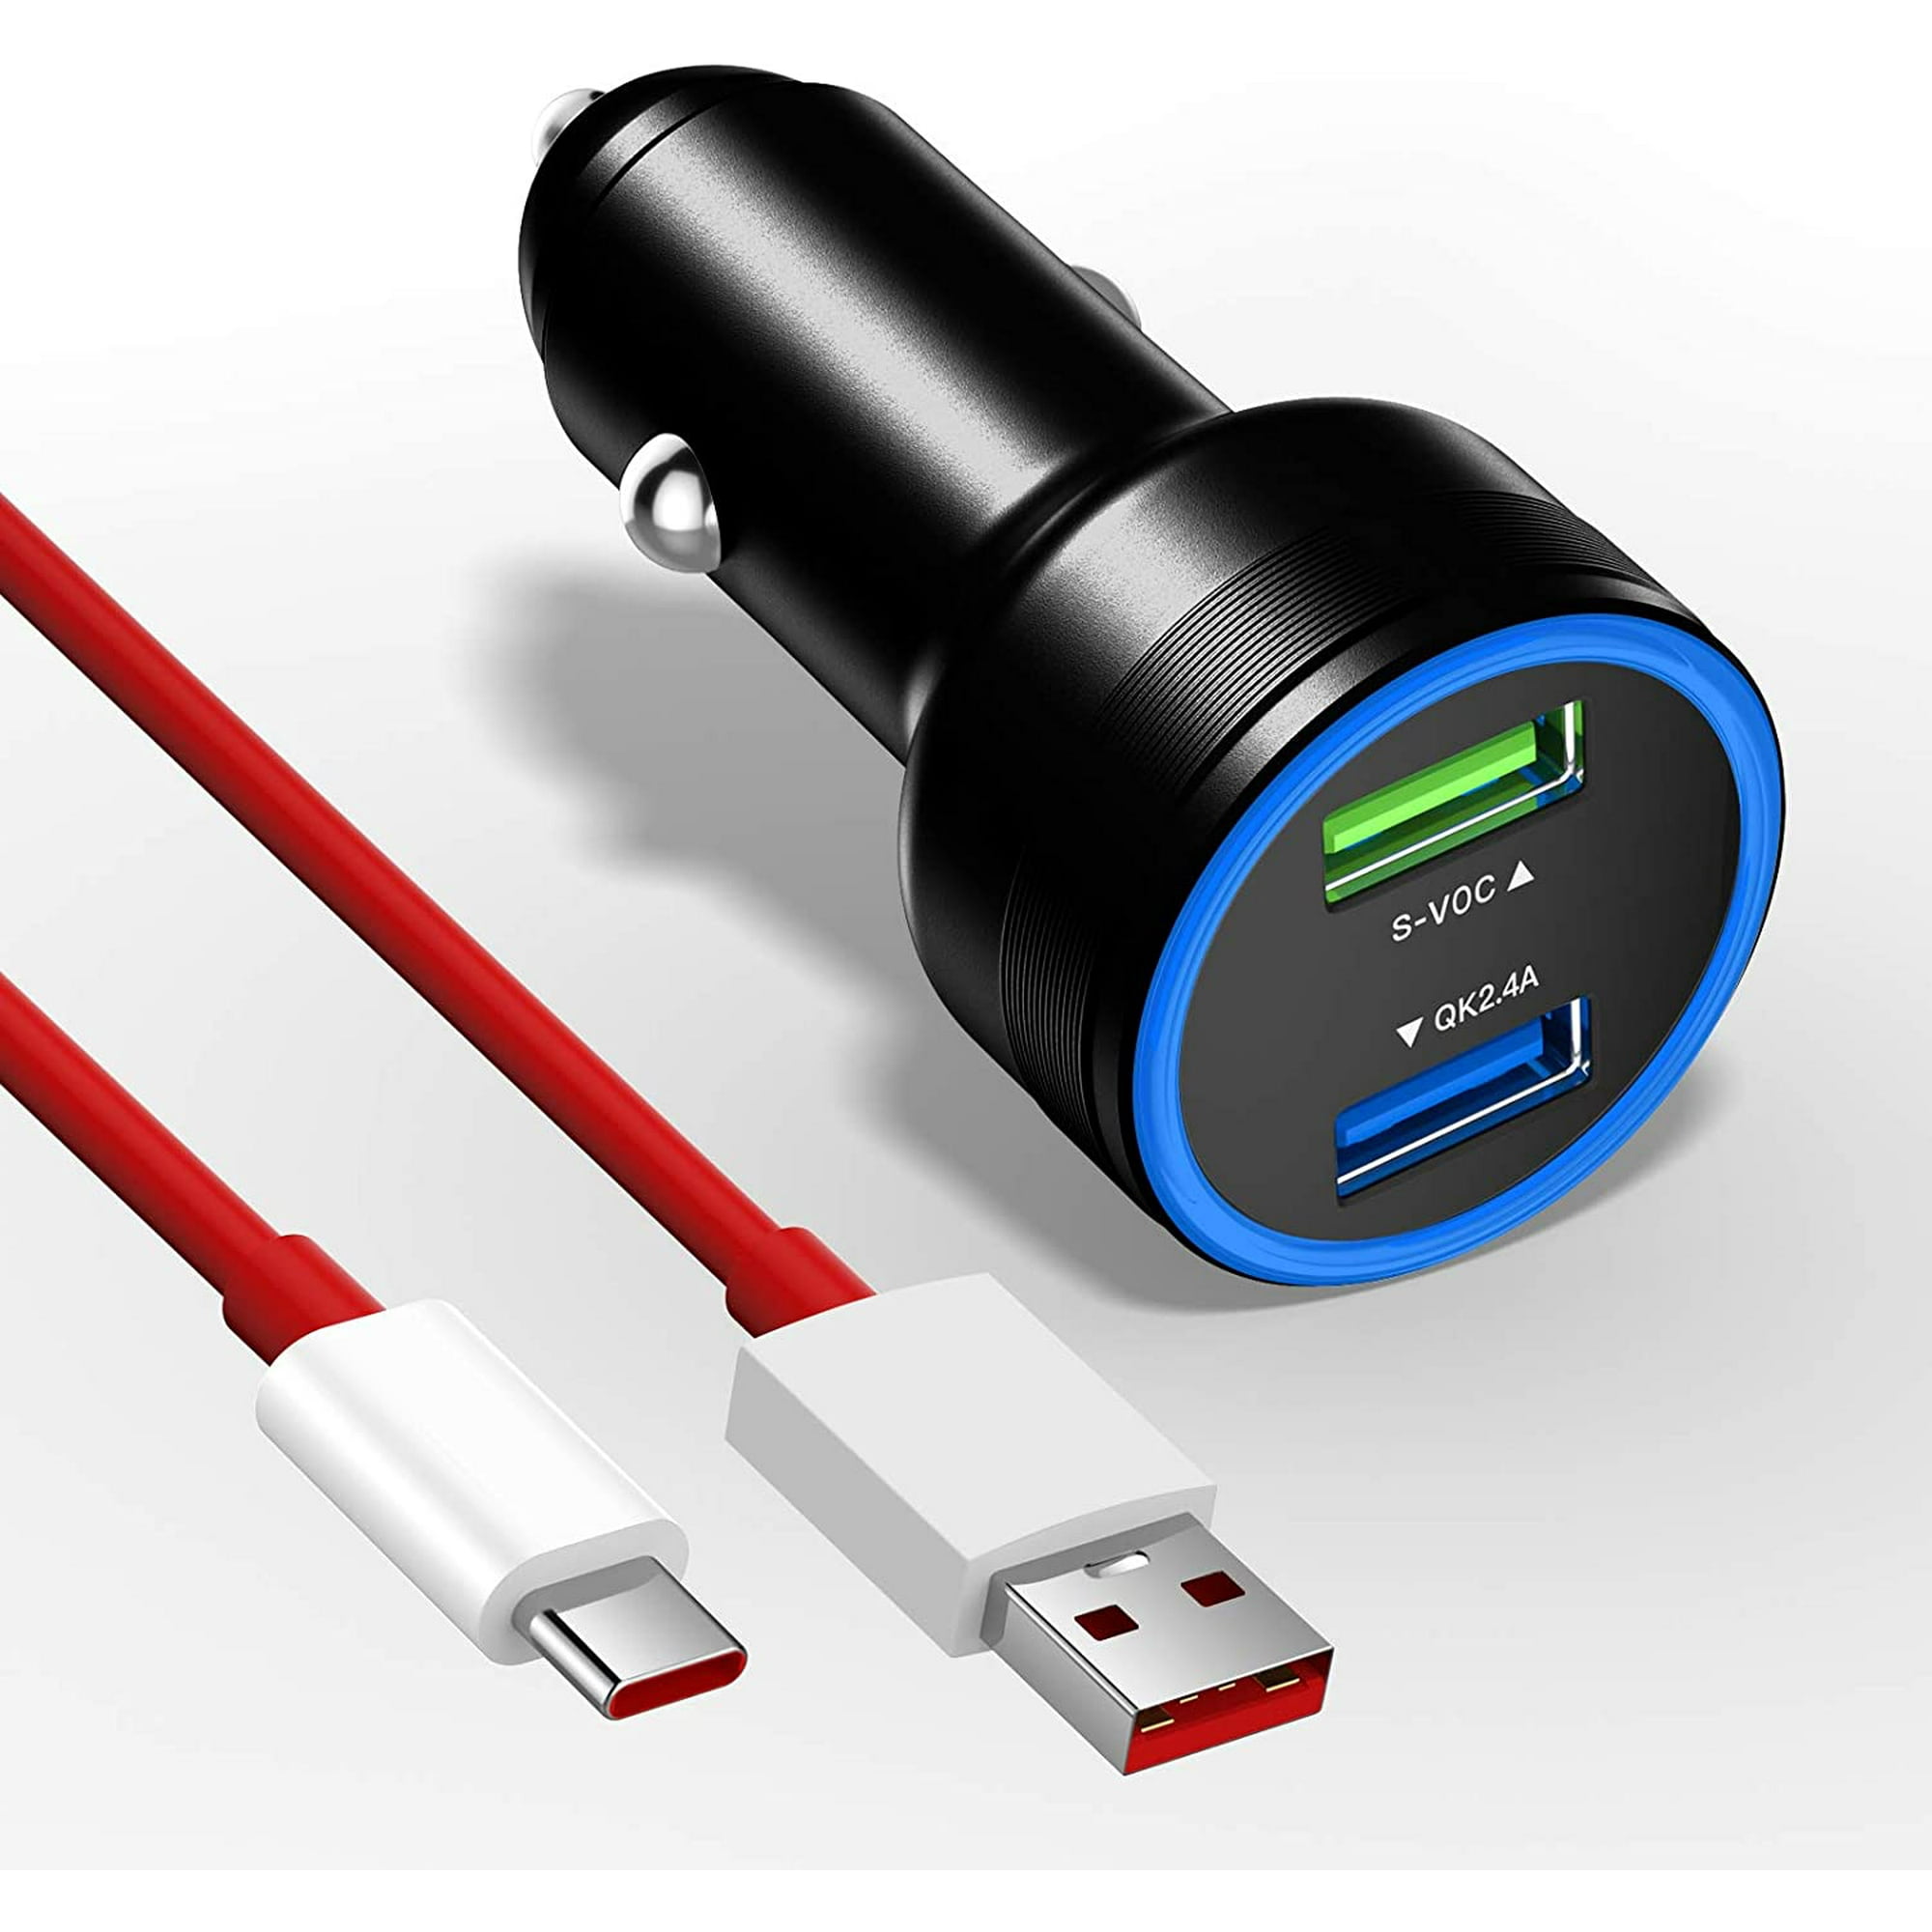 APETOO Compatible with OnePlus 7 Pro Car Charger, 5V 4A Dash Car Charger  Adapterfor OnePlus 6T/ 6/ 5T/ 5/ 3T/ 3, Warp | Walmart Canada